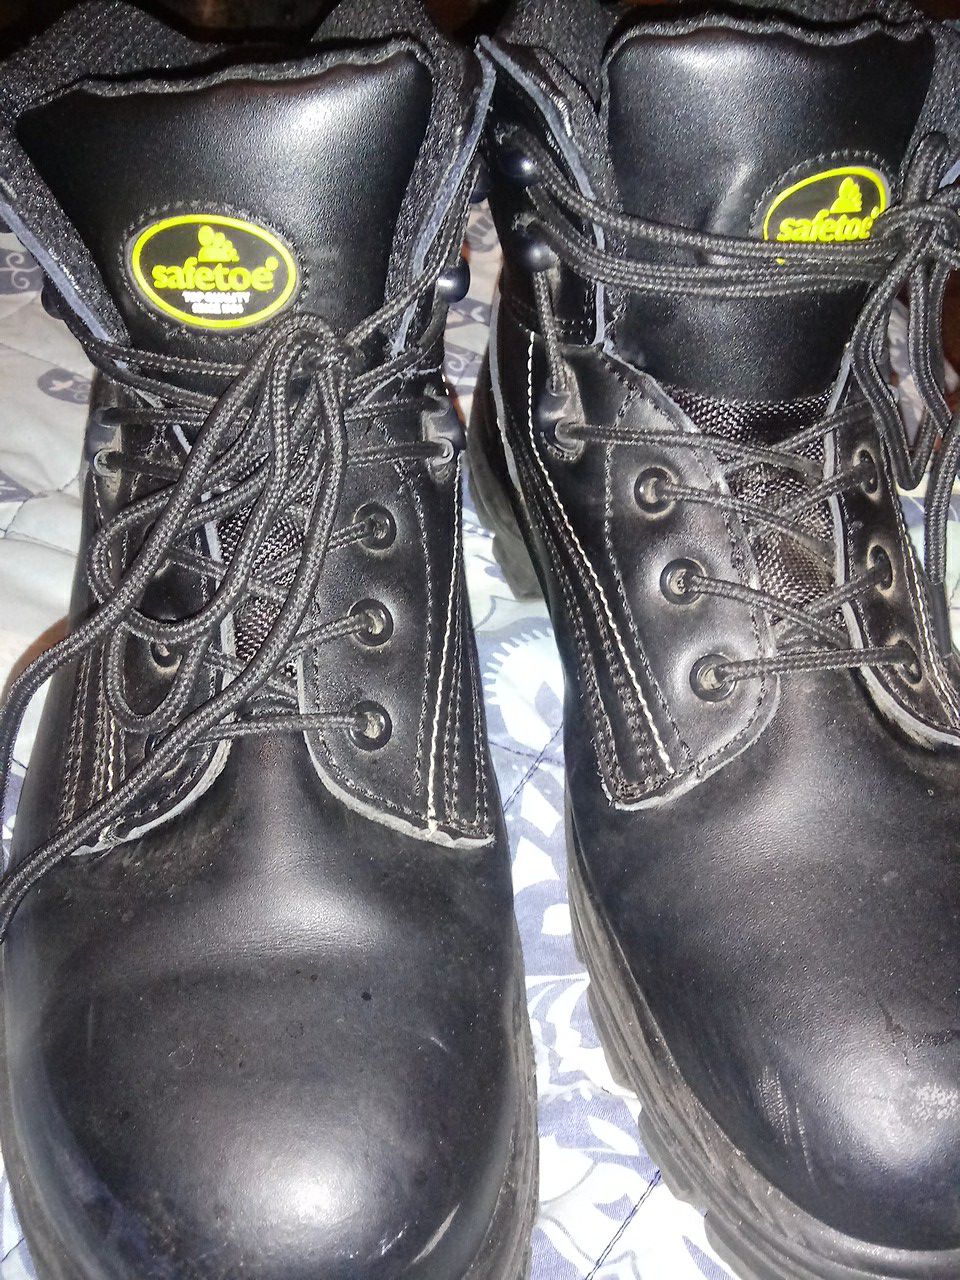 They is steel toe work boots size 12